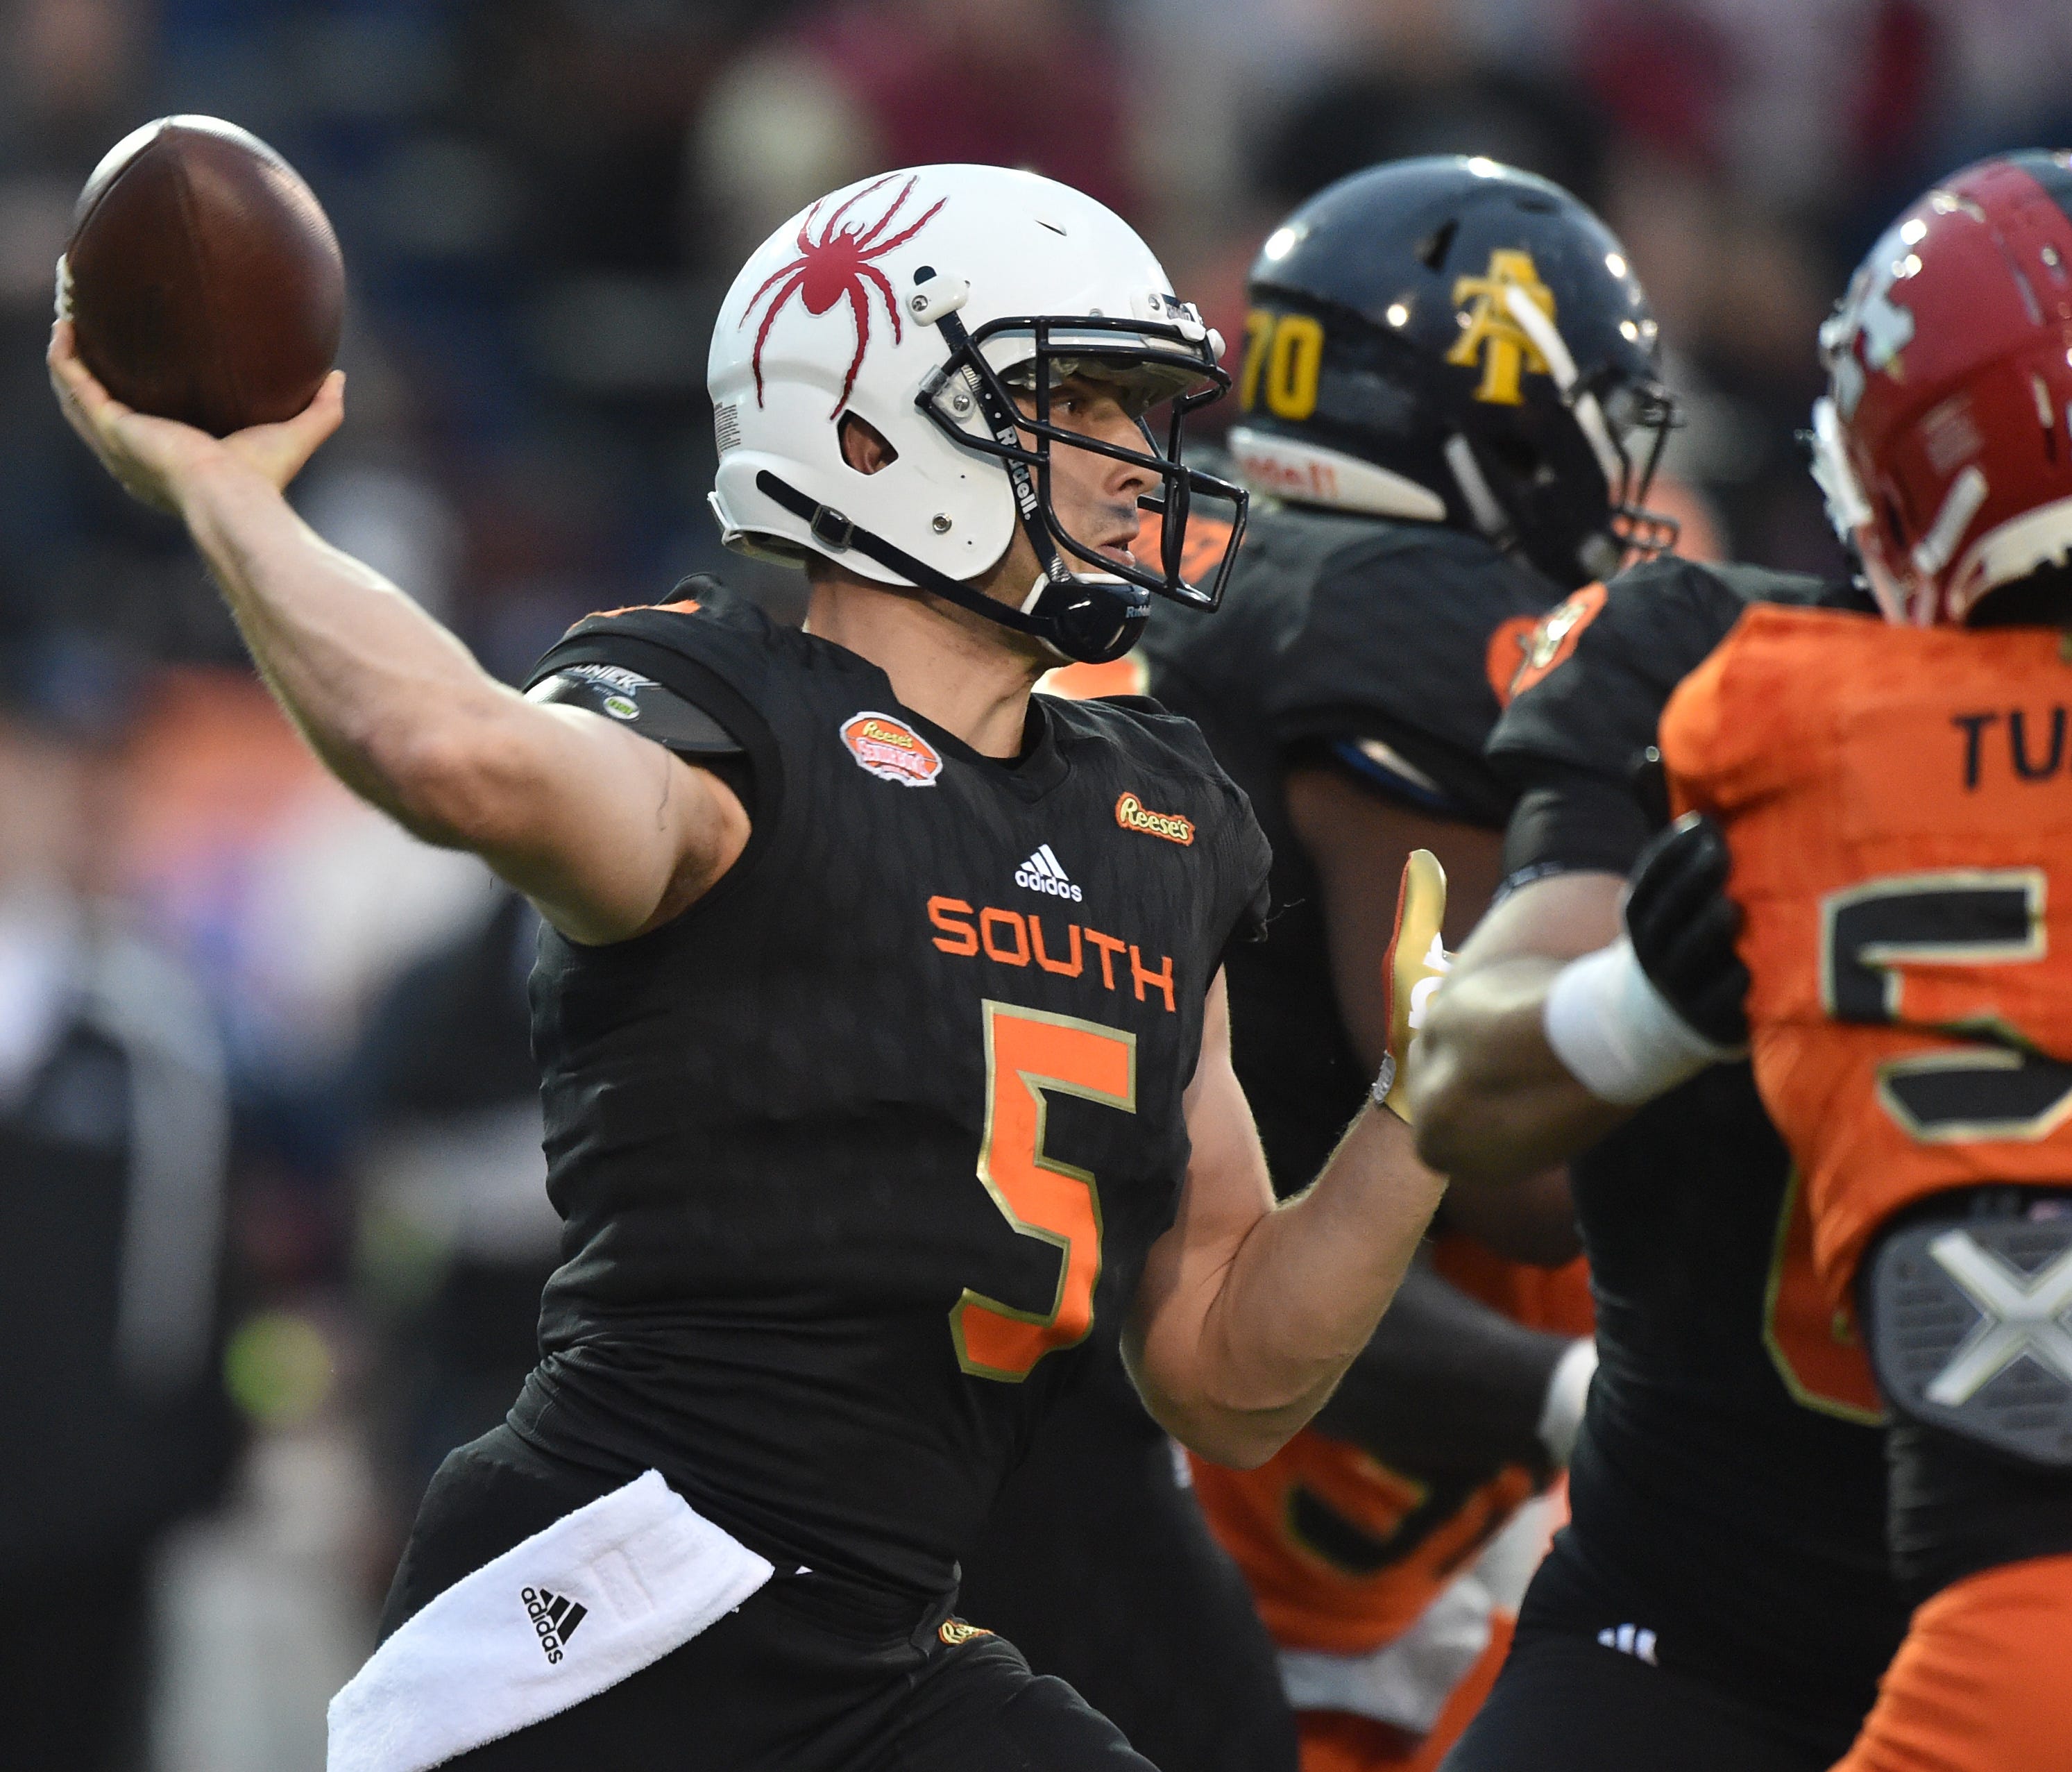 Richmond QB Kyle Lauletta made the most of his Senior Bowl experience.